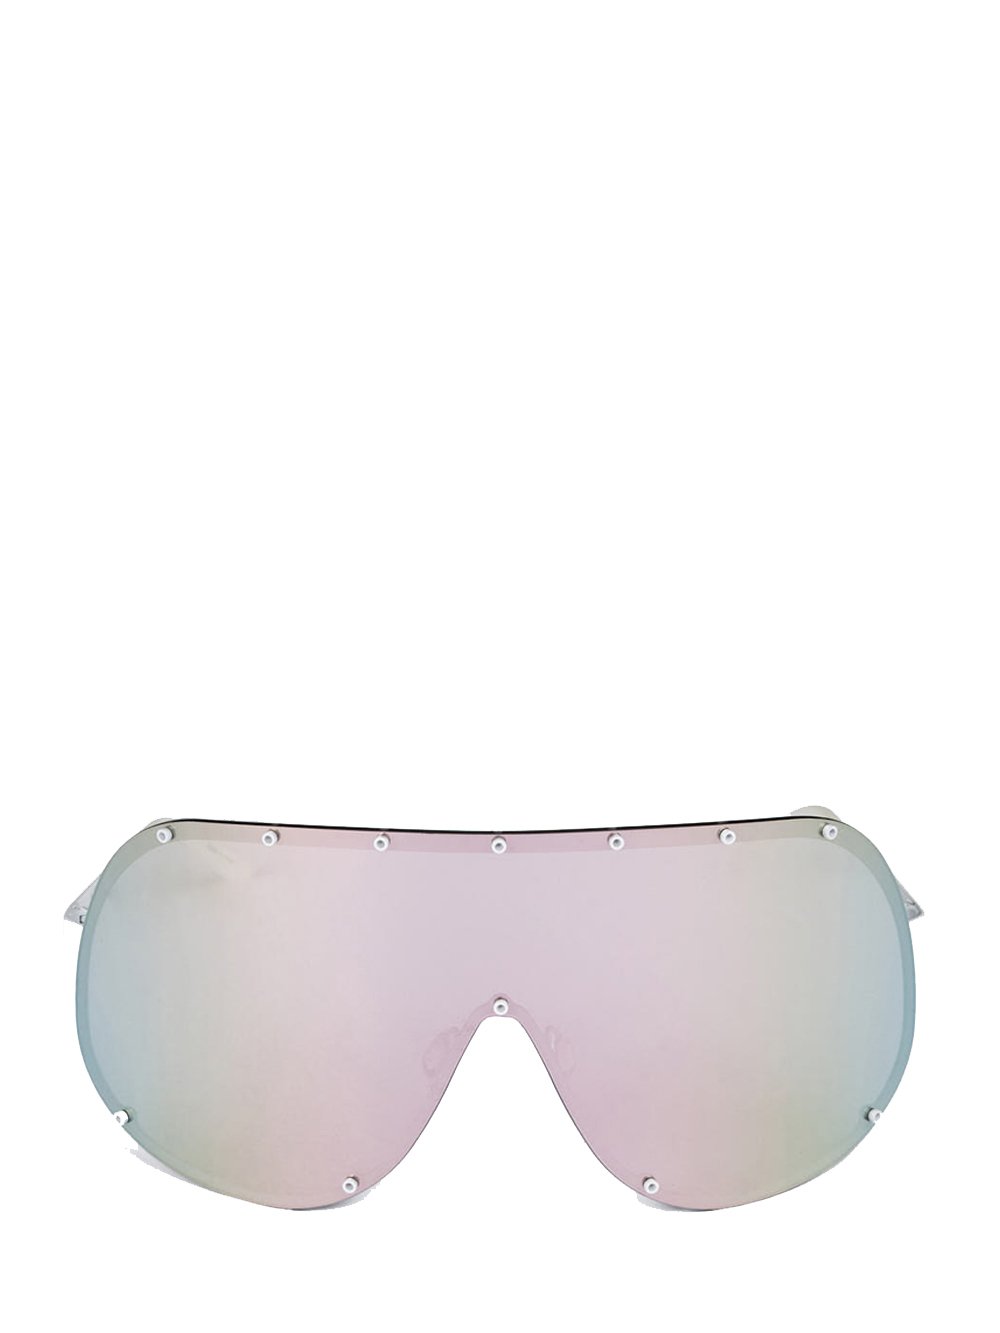 RICK OWENS SHIELD SUNGLASSES IN WHITE WITH PINK LENS